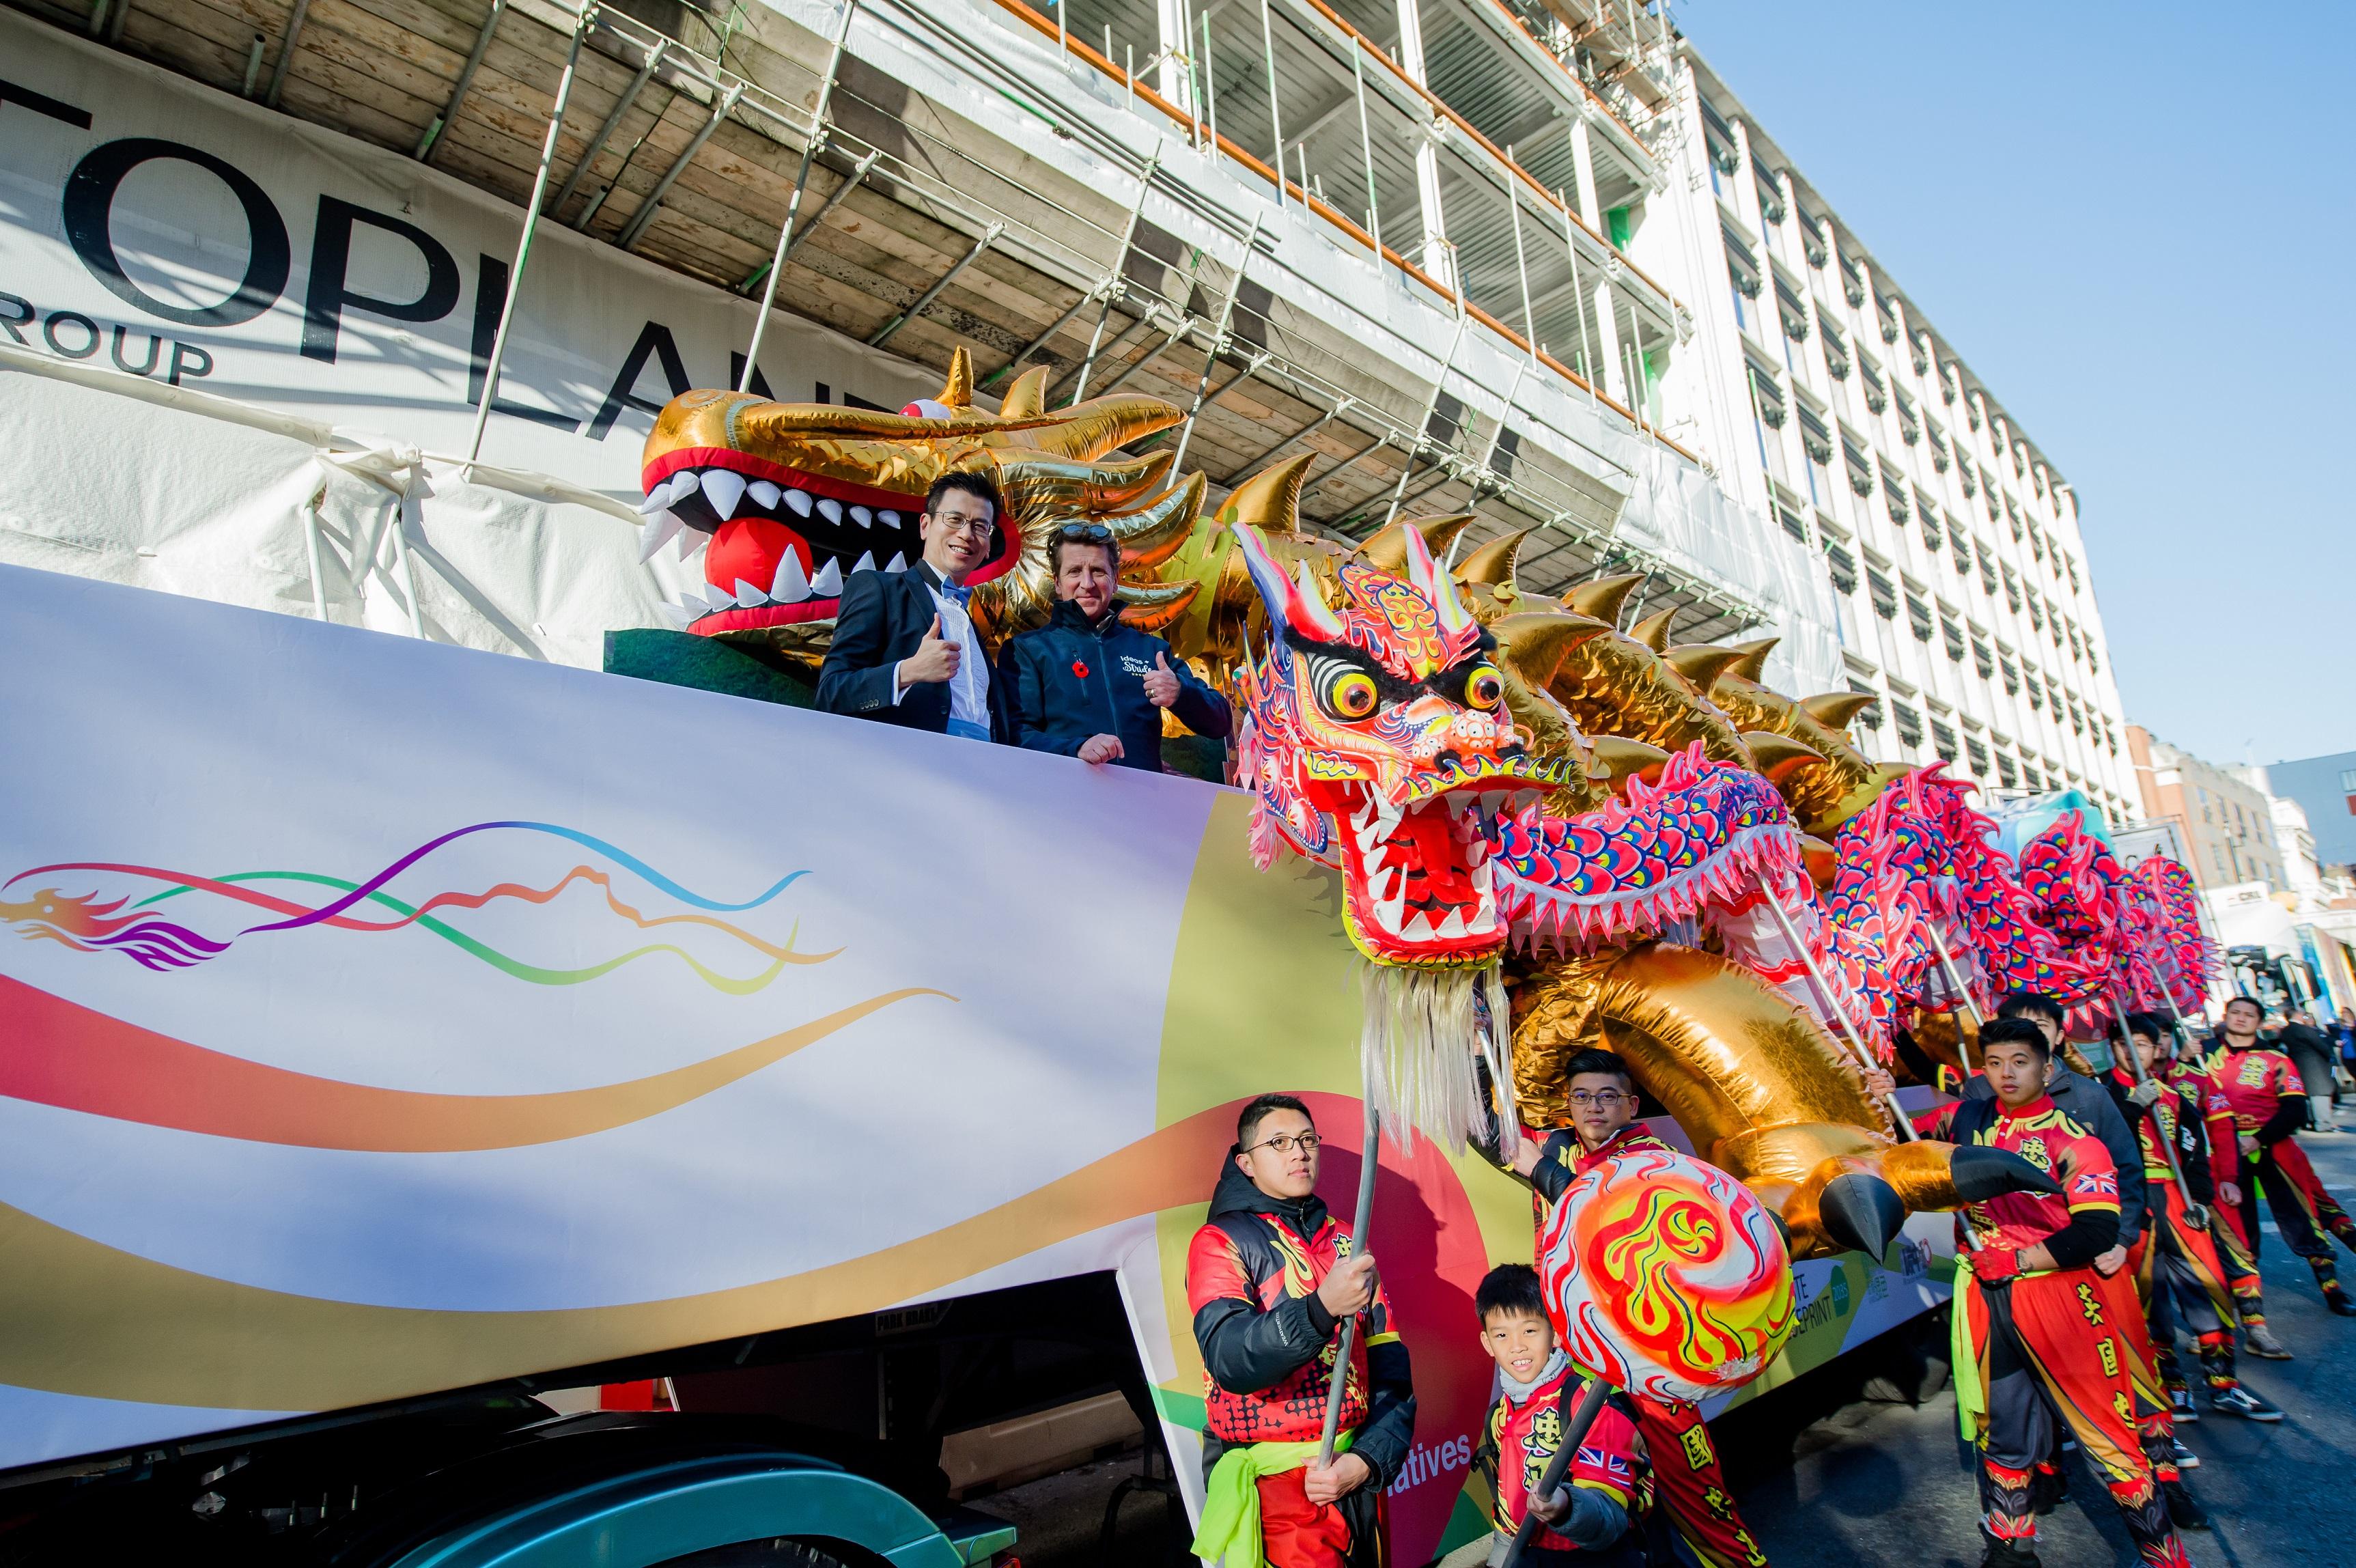 The Hong Kong Economic and Trade Office, London took part in the City of London Lord Mayor's Show on November 11 (London time) with a float highlighting Hong Kong's plan to achieve carbon neutrality before 2050. Photo shows the lion dancers are being well-prepared and ready to go.